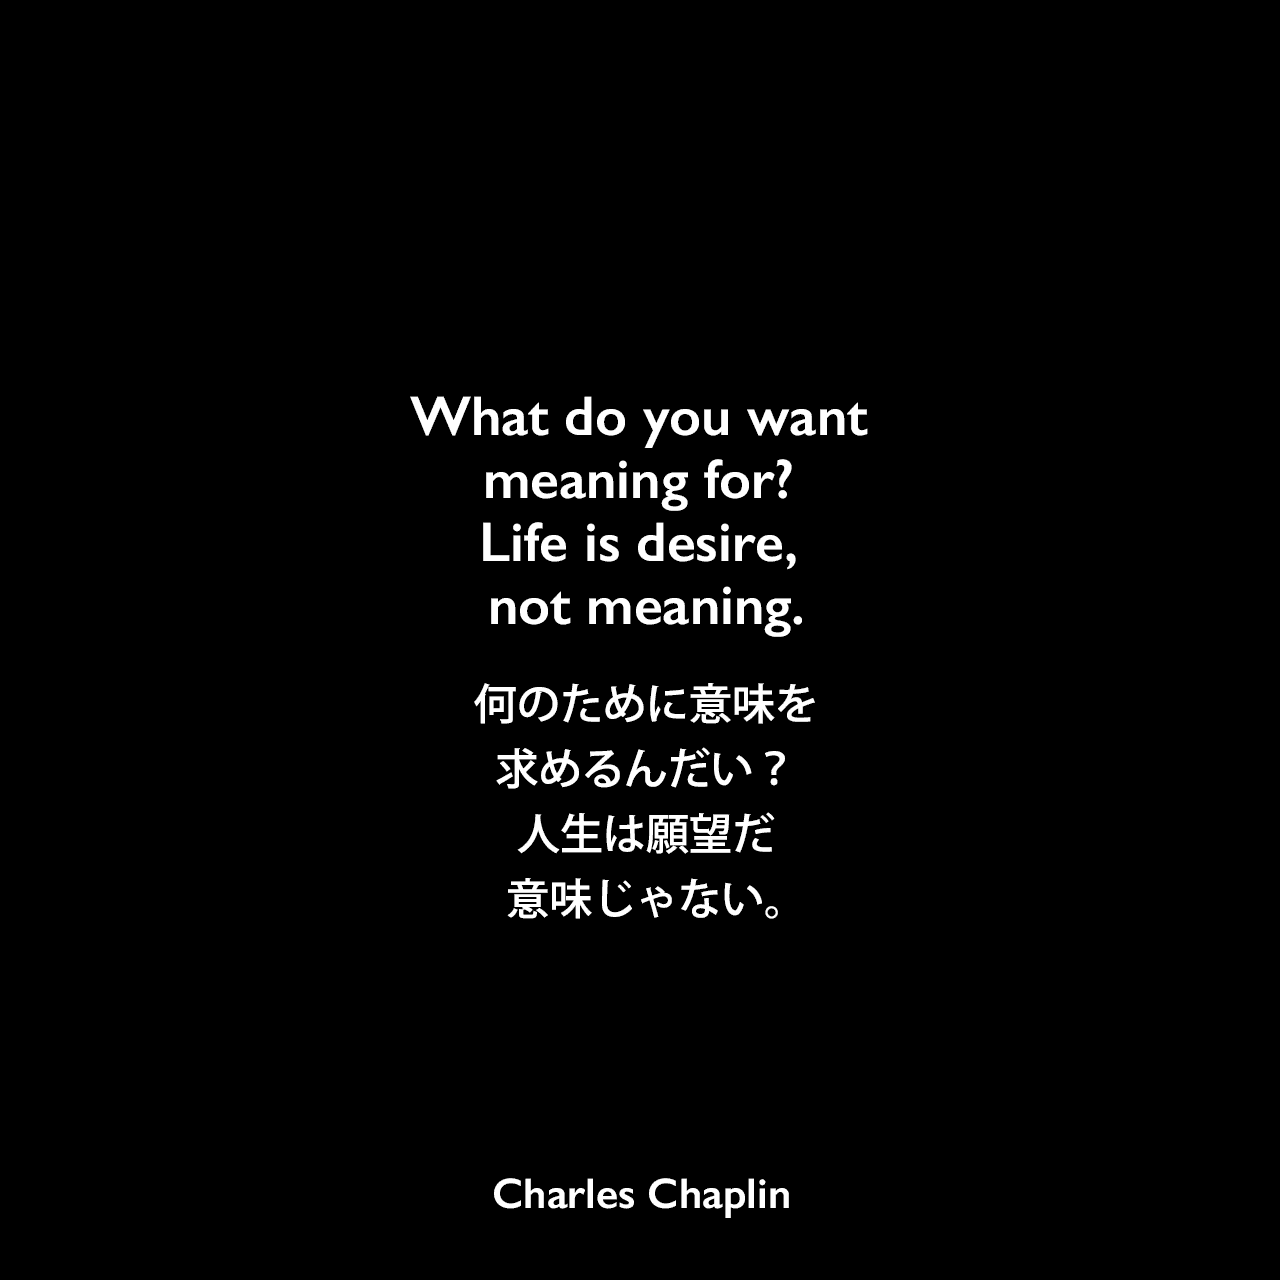 What do you want meaning for? Life is desire, not meaning.何のために意味を求めるんだい？人生は願望だ、意味じゃない。